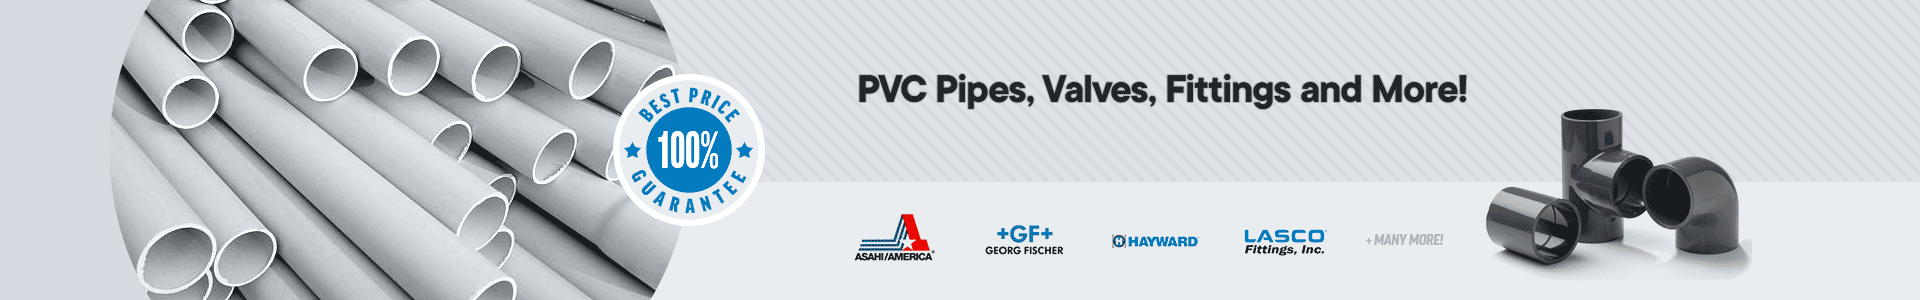 PVC Pipes, Valves, Fittings and More!